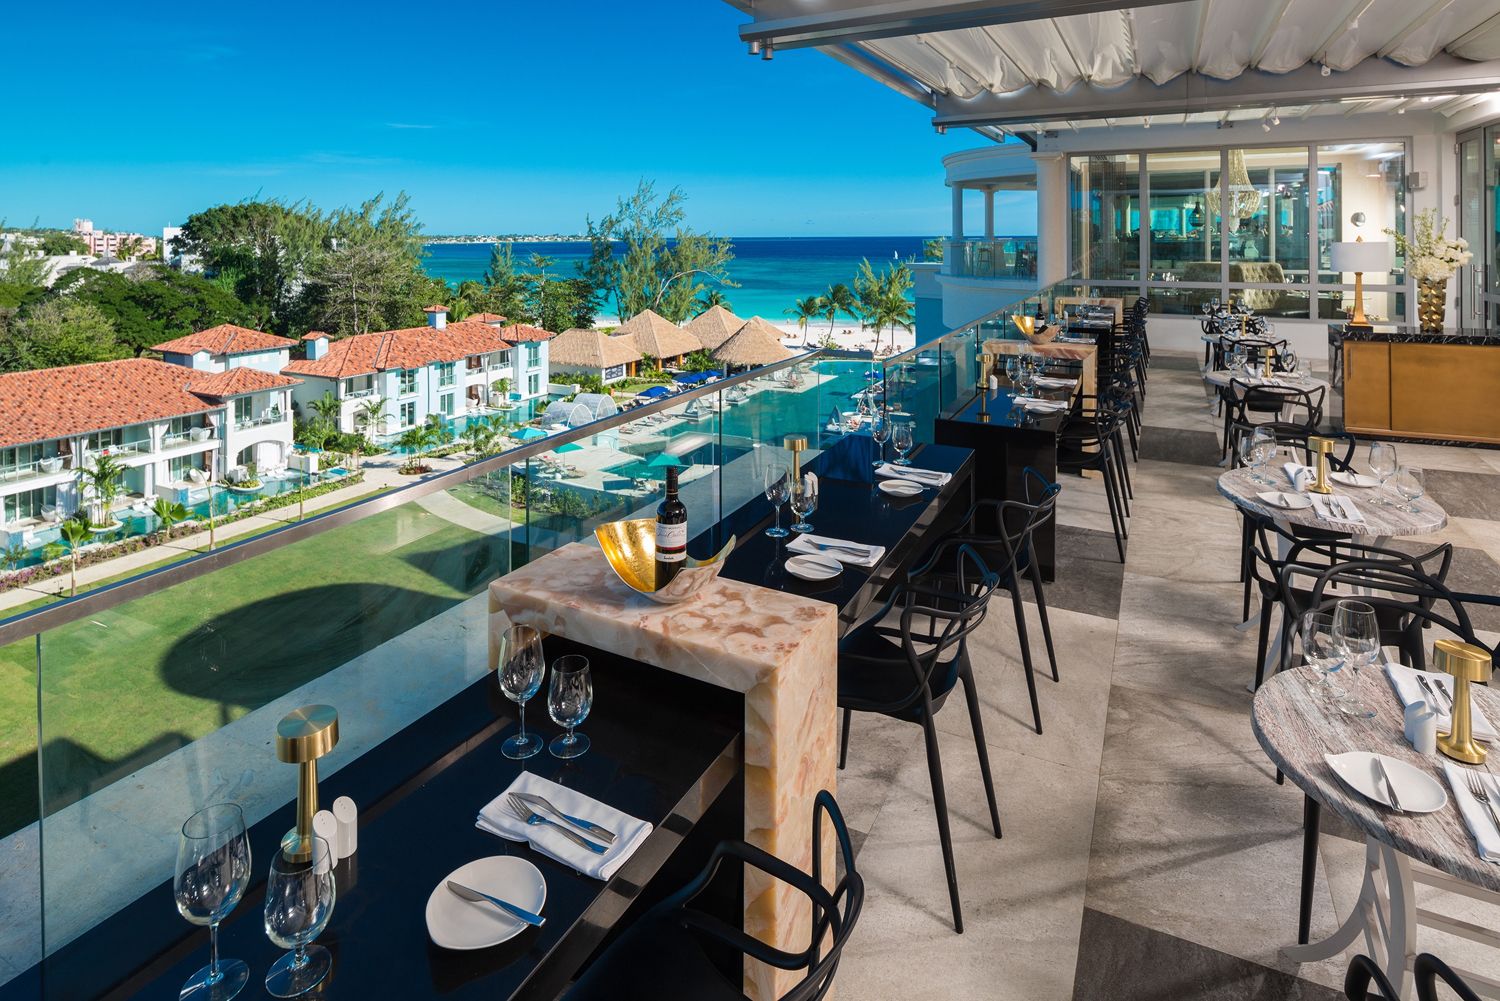 Review What Guests Love About Sandals Royal Barbados